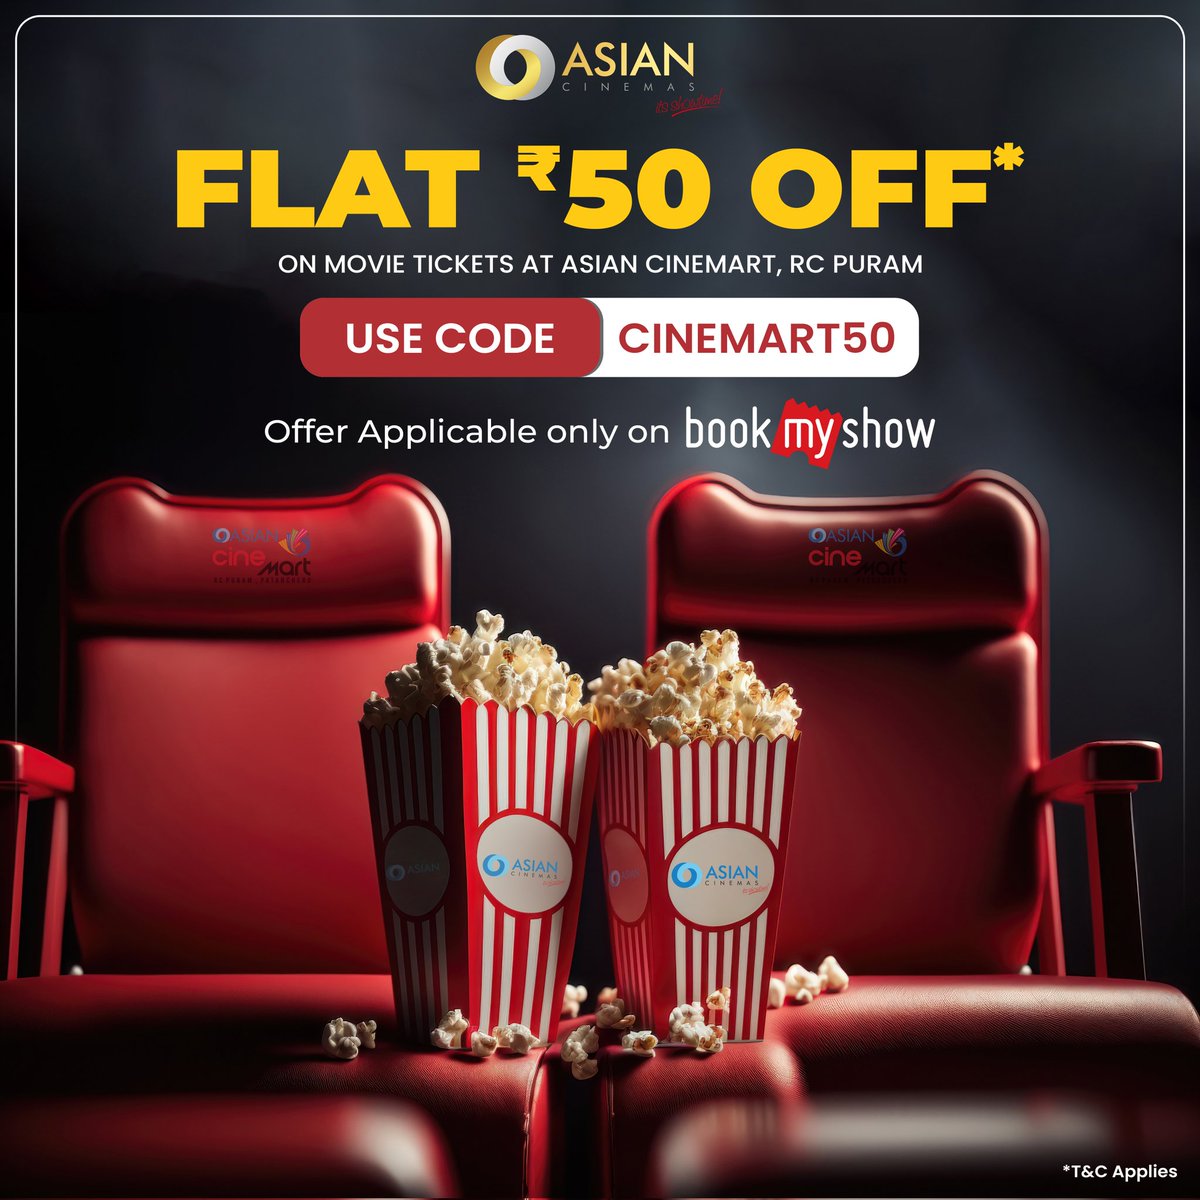 Get ready for an unbeatable movie experience at Asian Cinemart RC Puram! Enjoy a flat ₹50 OFF on your tickets, exclusively on BookMyShow! 🎟️🔥 Here's the Deal: 🎉 Flat ₹50 OFF 📍 Venue: Asian cinemart , RC Puram💥 Use Coupon: CINEMART50📲 📅 Book via : BookMyShow